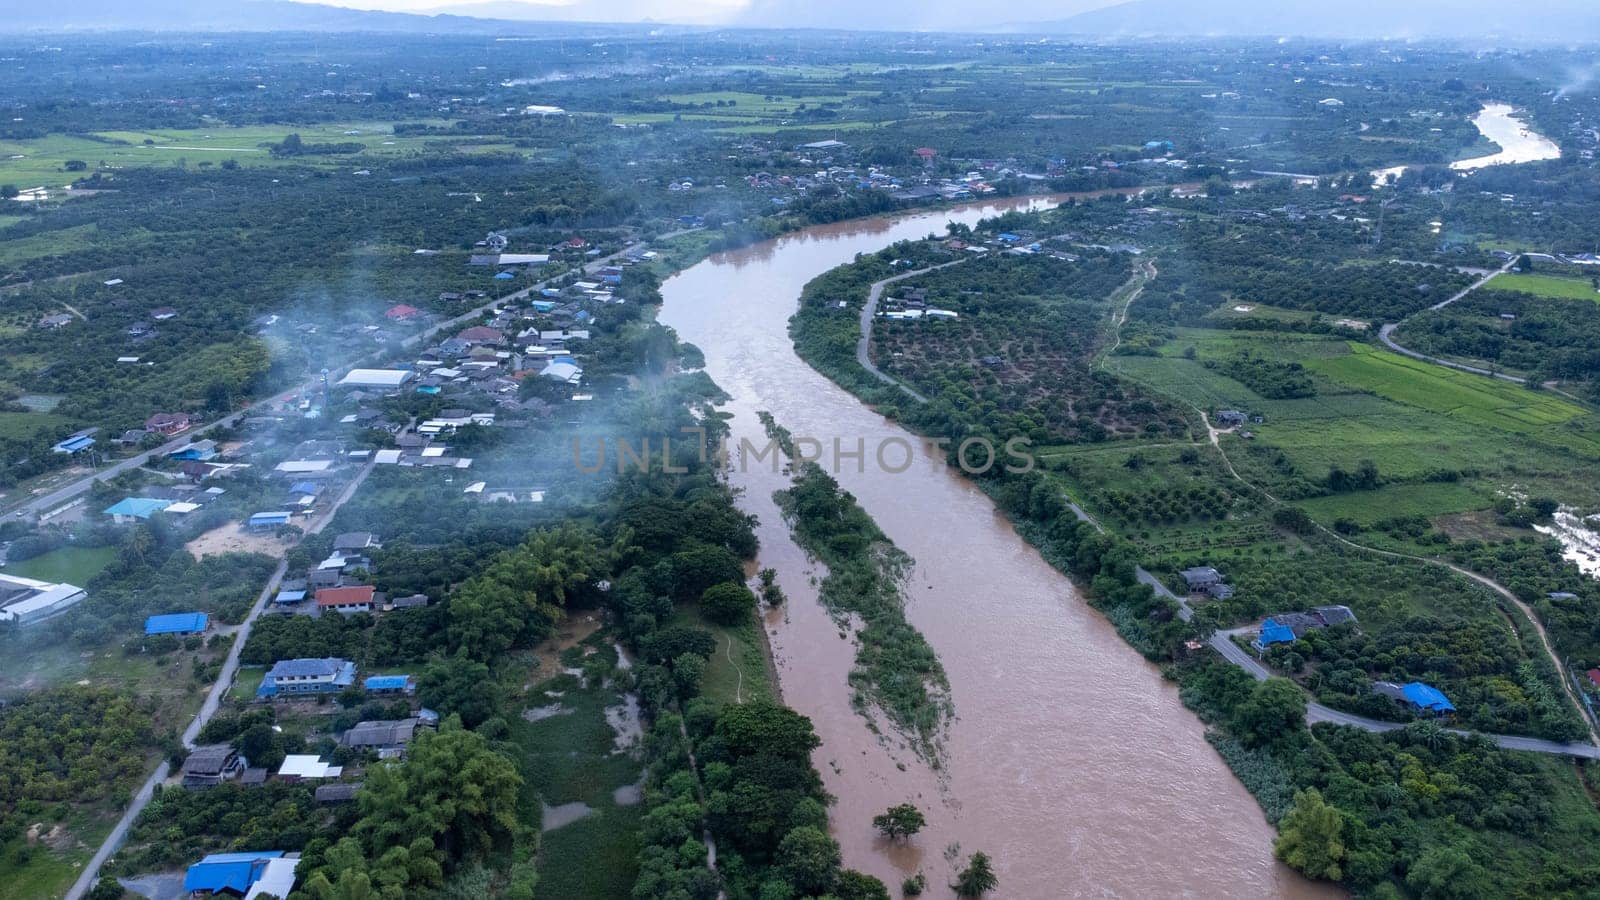 Aerial view of the Ping River across rice fields and rural villages during sunset. Views of Chiang Mai villages and the Ping River from a drone.